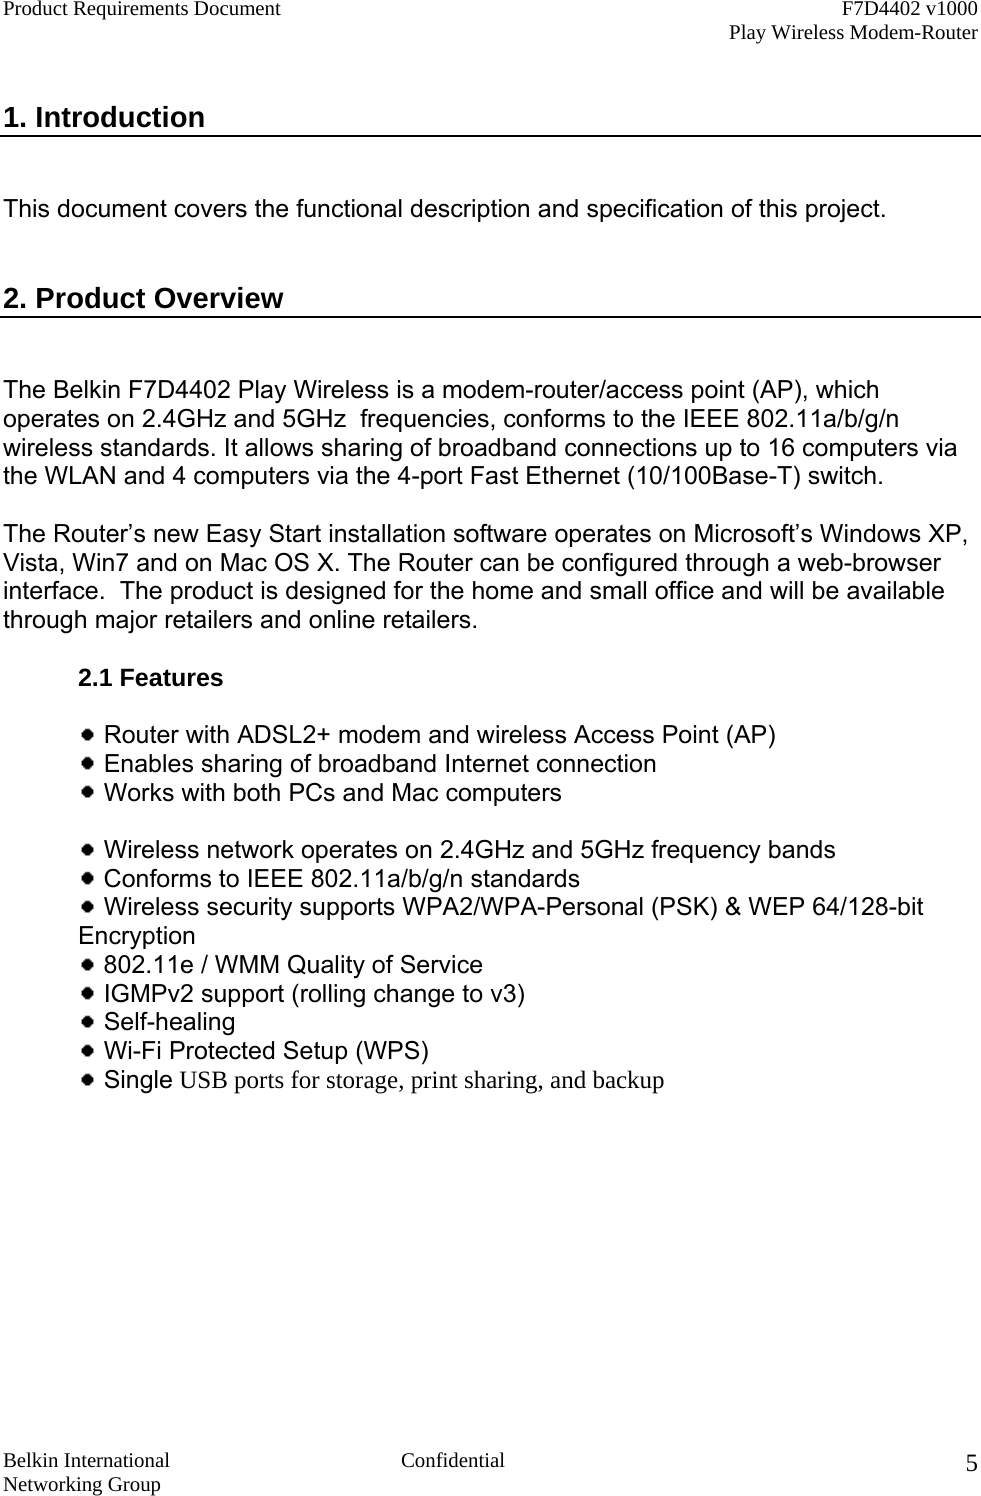 Product Requirements Document    F7D4402 v1000     Play Wireless Modem-Router  Belkin International  Confidential Networking Group 5 1. Introduction   This document covers the functional description and specification of this project.   2. Product Overview    The Belkin F7D4402 Play Wireless is a modem-router/access point (AP), which operates on 2.4GHz and 5GHz  frequencies, conforms to the IEEE 802.11a/b/g/n wireless standards. It allows sharing of broadband connections up to 16 computers via the WLAN and 4 computers via the 4-port Fast Ethernet (10/100Base-T) switch.    The Router’s new Easy Start installation software operates on Microsoft’s Windows XP, Vista, Win7 and on Mac OS X. The Router can be configured through a web-browser interface.  The product is designed for the home and small office and will be available through major retailers and online retailers.  2.1 Features     Router with ADSL2+ modem and wireless Access Point (AP)   Enables sharing of broadband Internet connection   Works with both PCs and Mac computers     Wireless network operates on 2.4GHz and 5GHz frequency bands  Conforms to IEEE 802.11a/b/g/n standards  Wireless security supports WPA2/WPA-Personal (PSK) &amp; WEP 64/128-bit Encryption   802.11e / WMM Quality of Service    IGMPv2 support (rolling change to v3)   Self-healing   Wi-Fi Protected Setup (WPS)   Single USB ports for storage, print sharing, and backup  